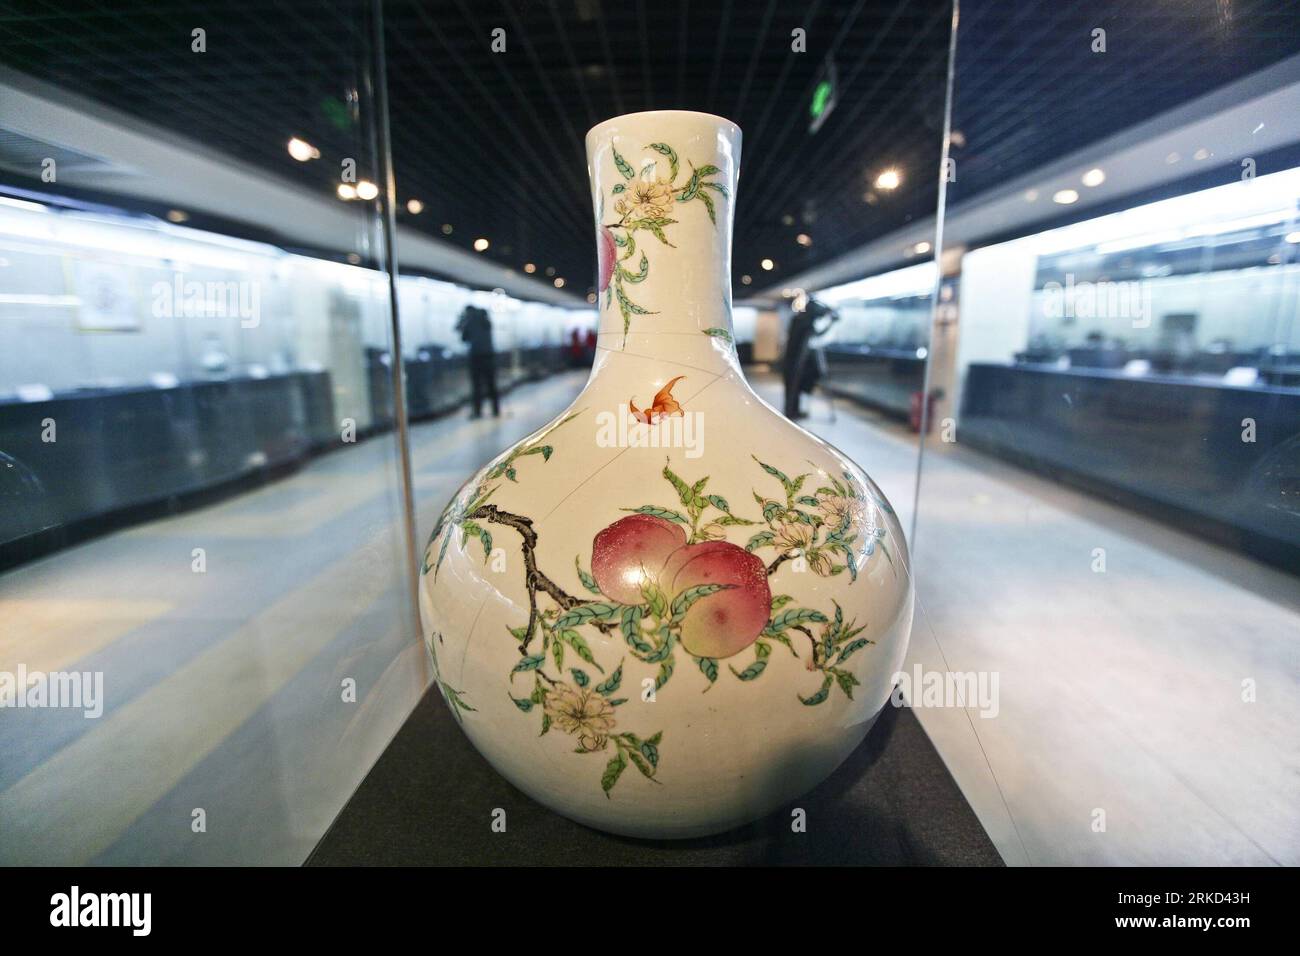 Bildnummer: 54858097  Datum: 20.01.2011  Copyright: imago/Xinhua (110127) -- BEIJING, Jan. 27, 2011 (Xinhua) -- A famille-rose vase from China s Palace Museum is displayed in Art Treasures Museum of the Chinese Nation in Beijing, capital of China. China s Palace Museum, located inside the Forbidden City, announced on Wednesday that a seven-year inventory, which began in 2004, reveals the museum s collection includes 1,807,558 objects, providing the first accurate appraisal of the size of the museum s collection. (Xinhua/Zhang Chuandong) (ly) CHINA-BEIJING-PALACE MUSEUM-COLLECTION-APPRAISAL (CN Stock Photo